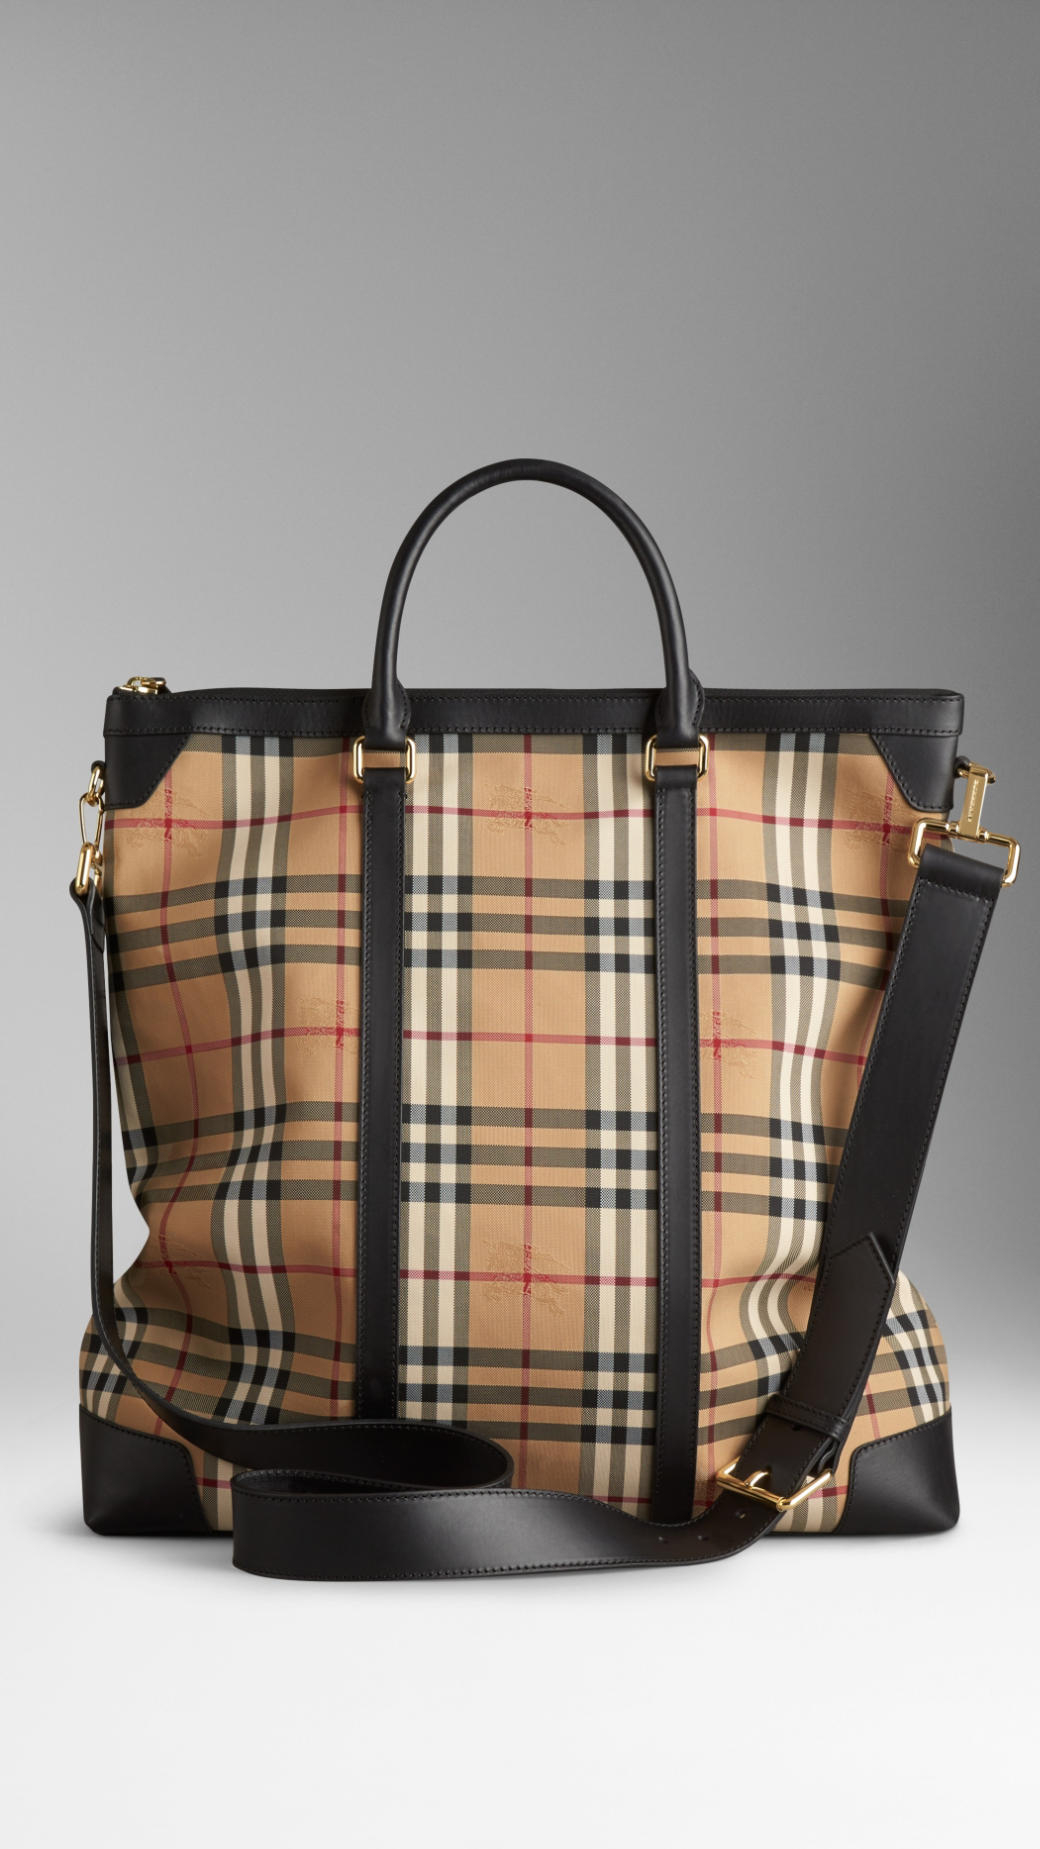 Burberry Large Horseferry Check Leather Tote Bag in Black for Men - Lyst